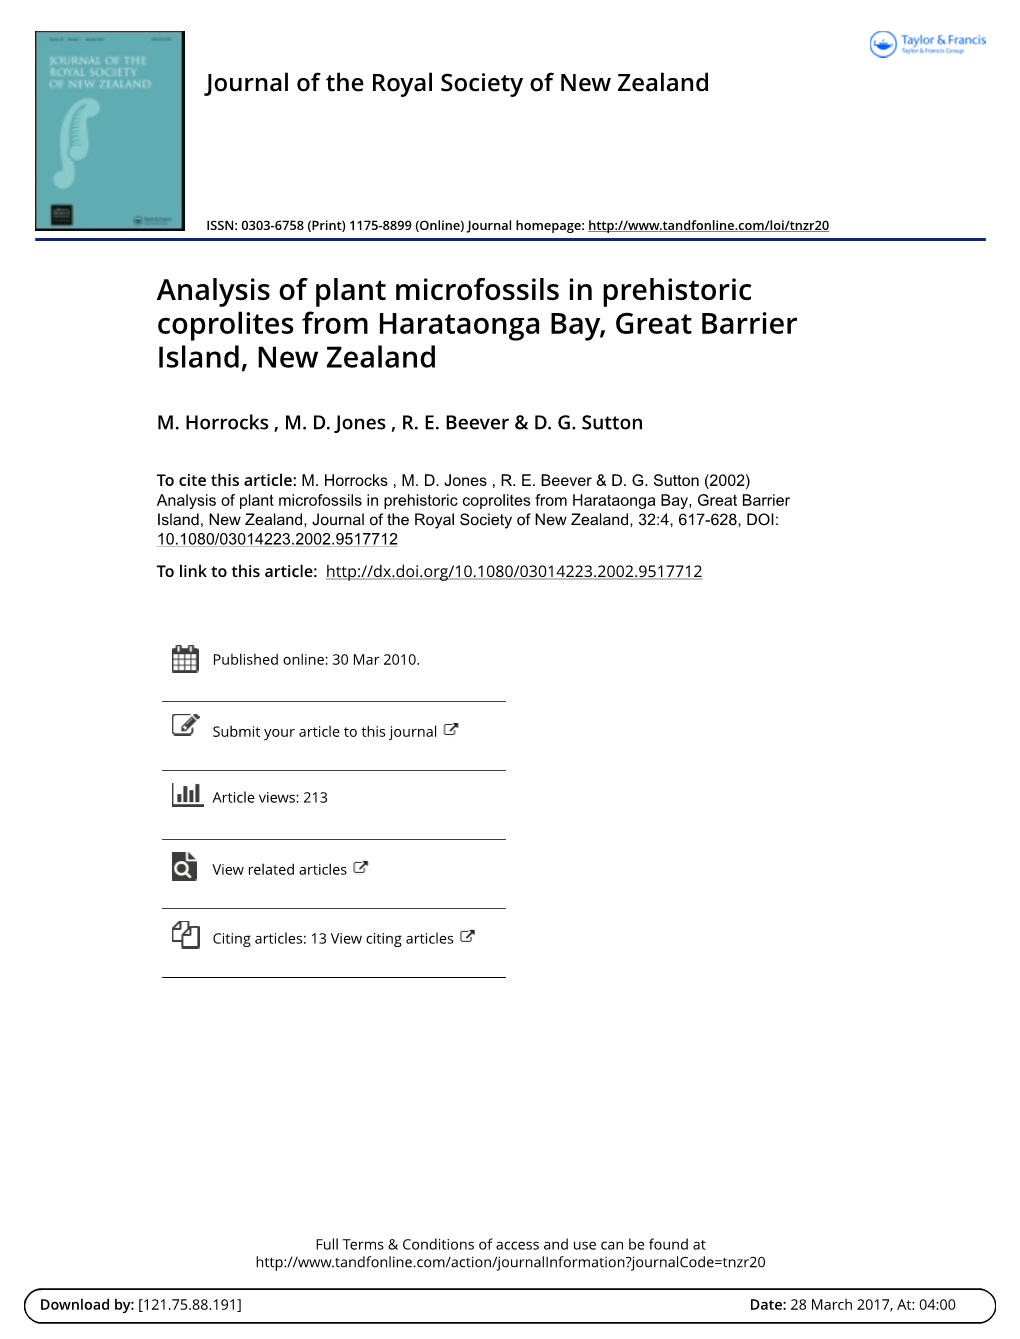 Analysis of Plant Microfossils in Prehistoric Coprolites from Harataonga Bay, Great Barrier Island, New Zealand